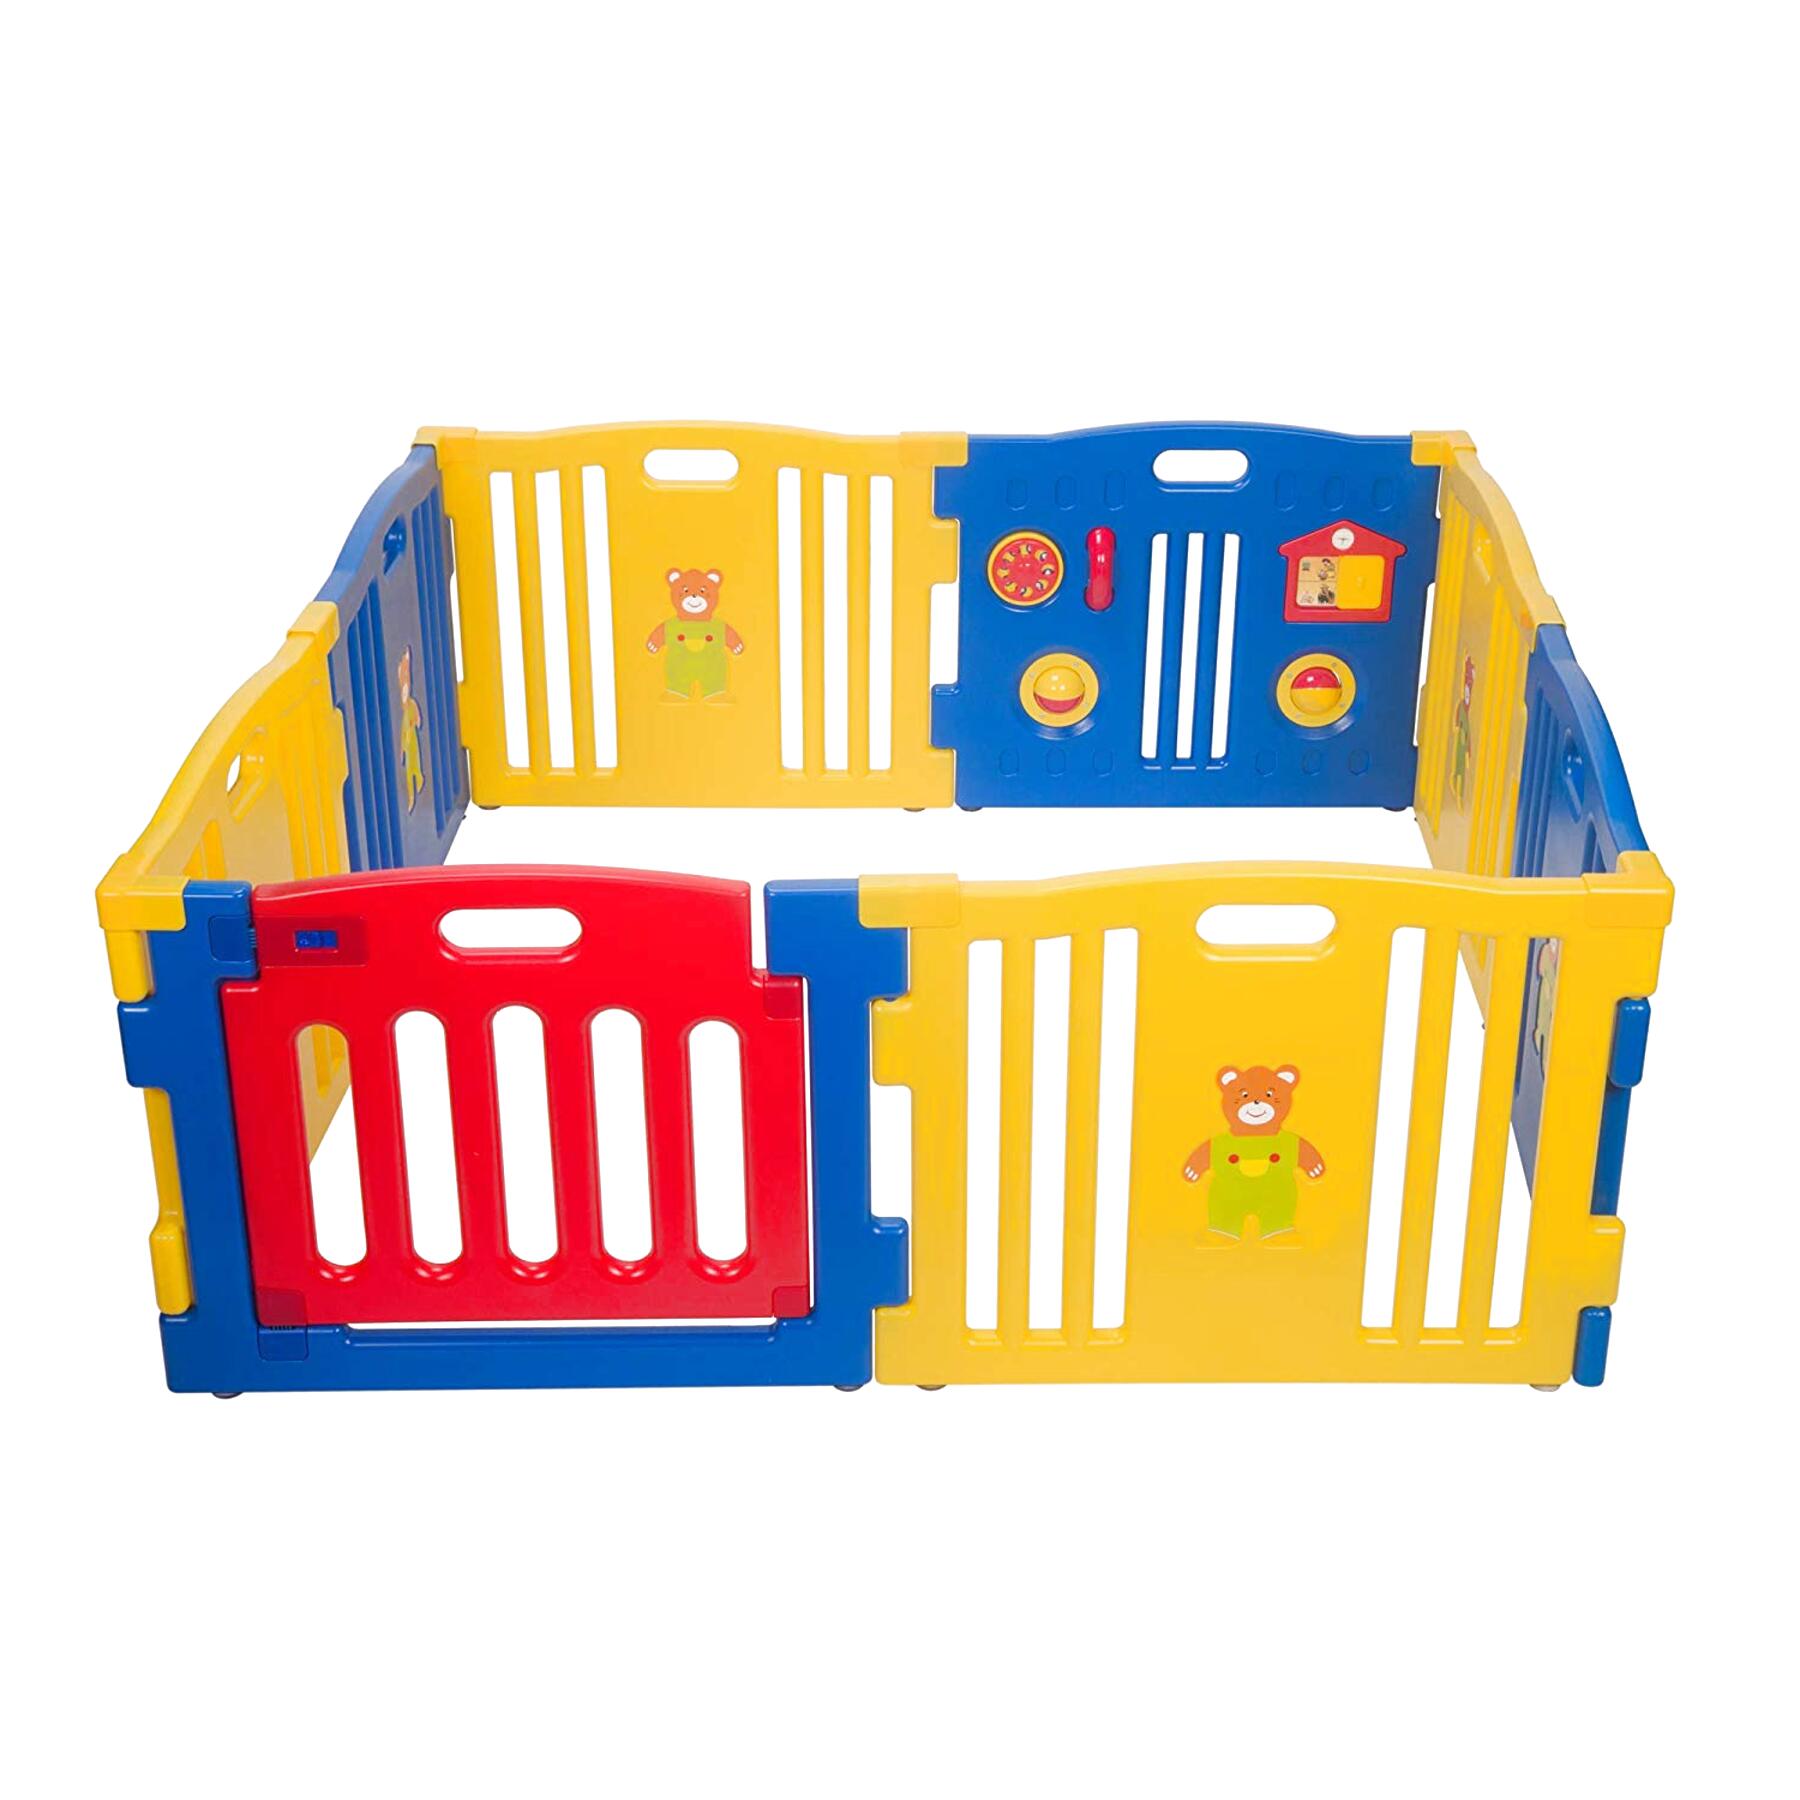 Plastic Play Pen for sale in UK View 25 bargains